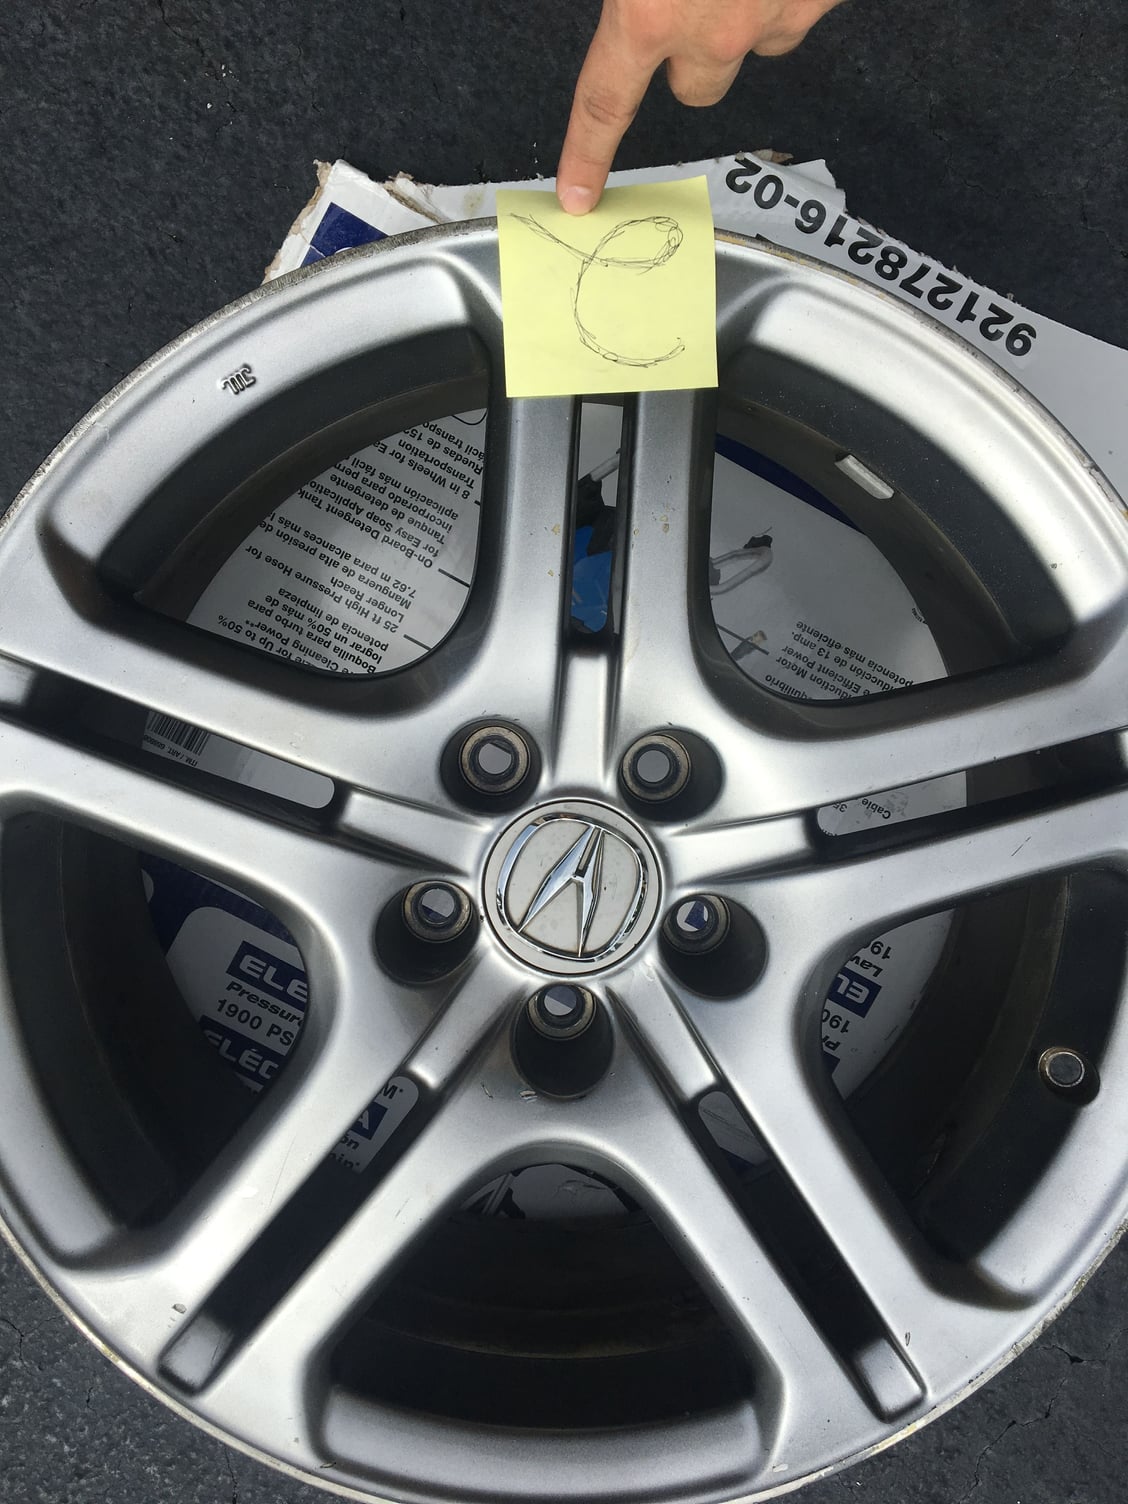 Wheels and Tires/Axles - SOLD: Gunmetal Acura A-Spec 18x8 Wheels - Used - 2004 to 2008 Acura TL - 2004 to 2008 Acura TSX - Boynton Beach, FL 33437, United States